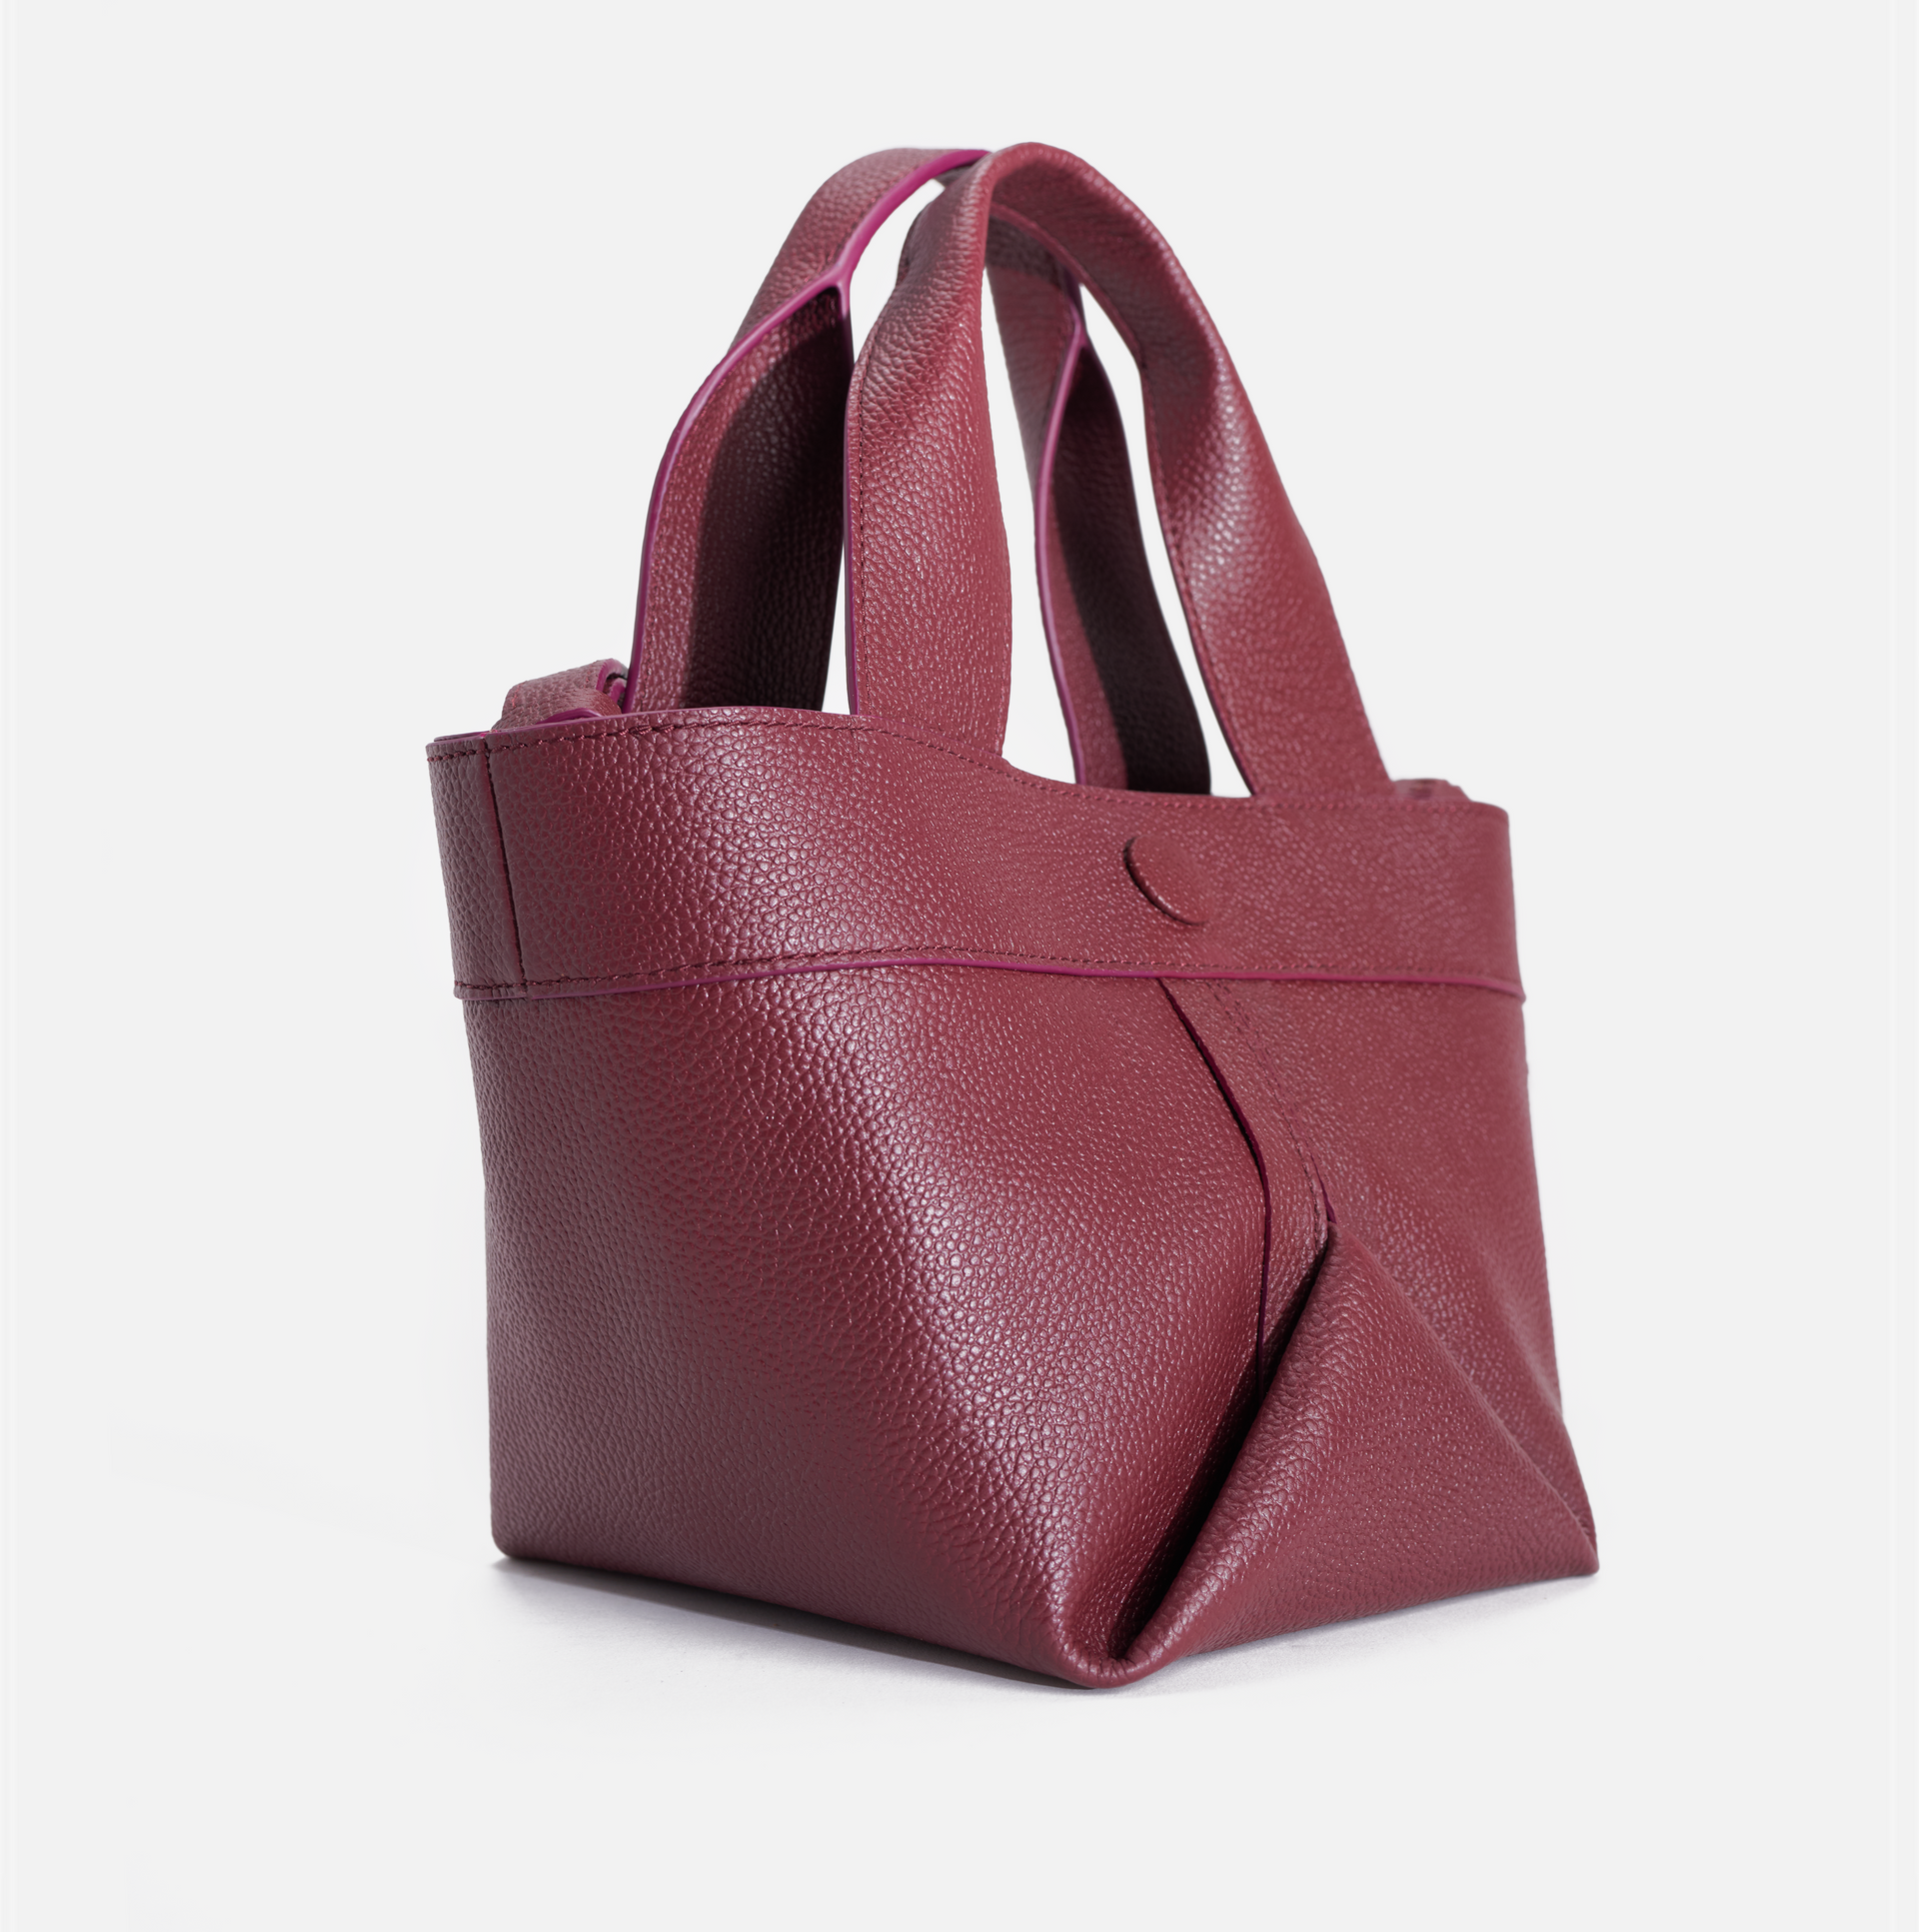 Gusset small pebble leather tote in carnelian